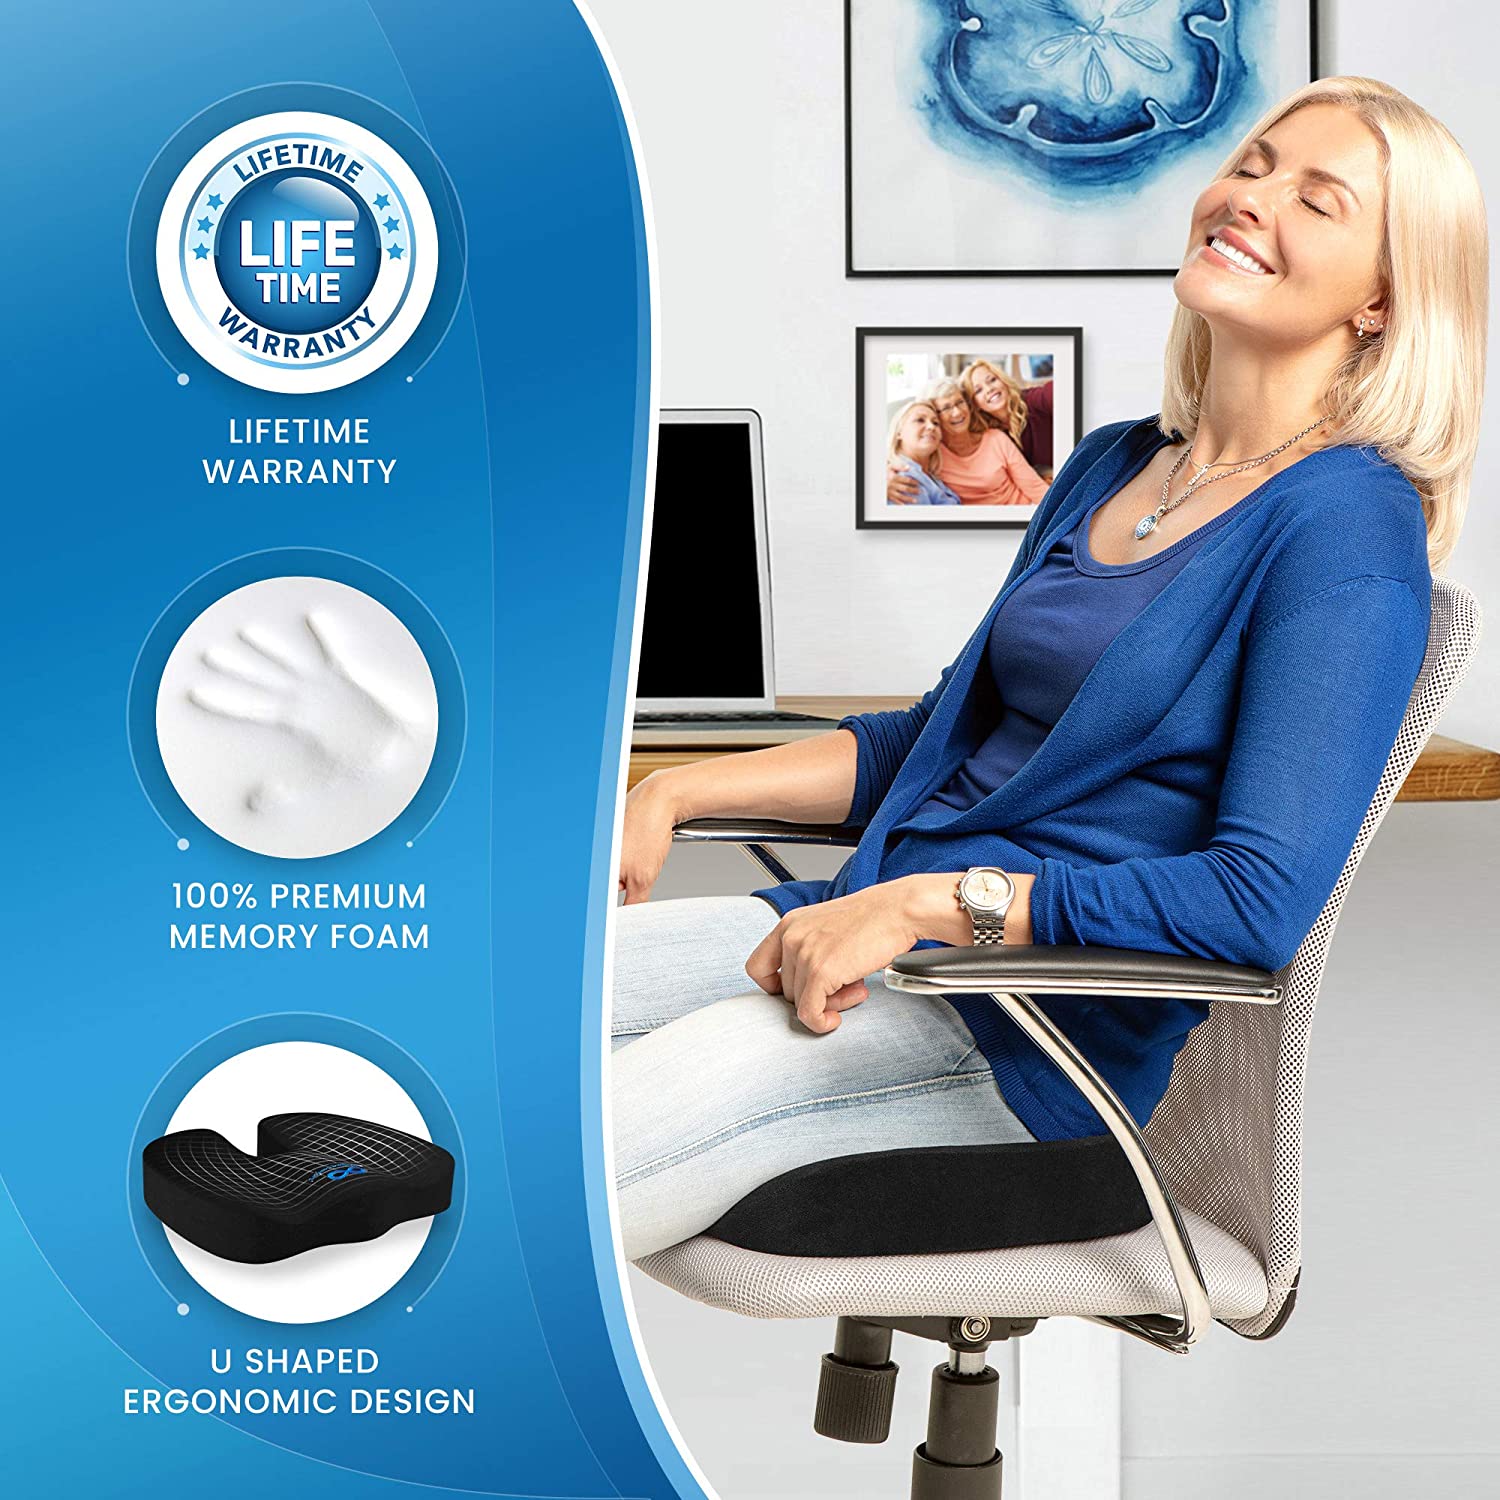 Top 10 Best Orthopedic Seat Cushion for Pressure Relief in 2021 Reviews